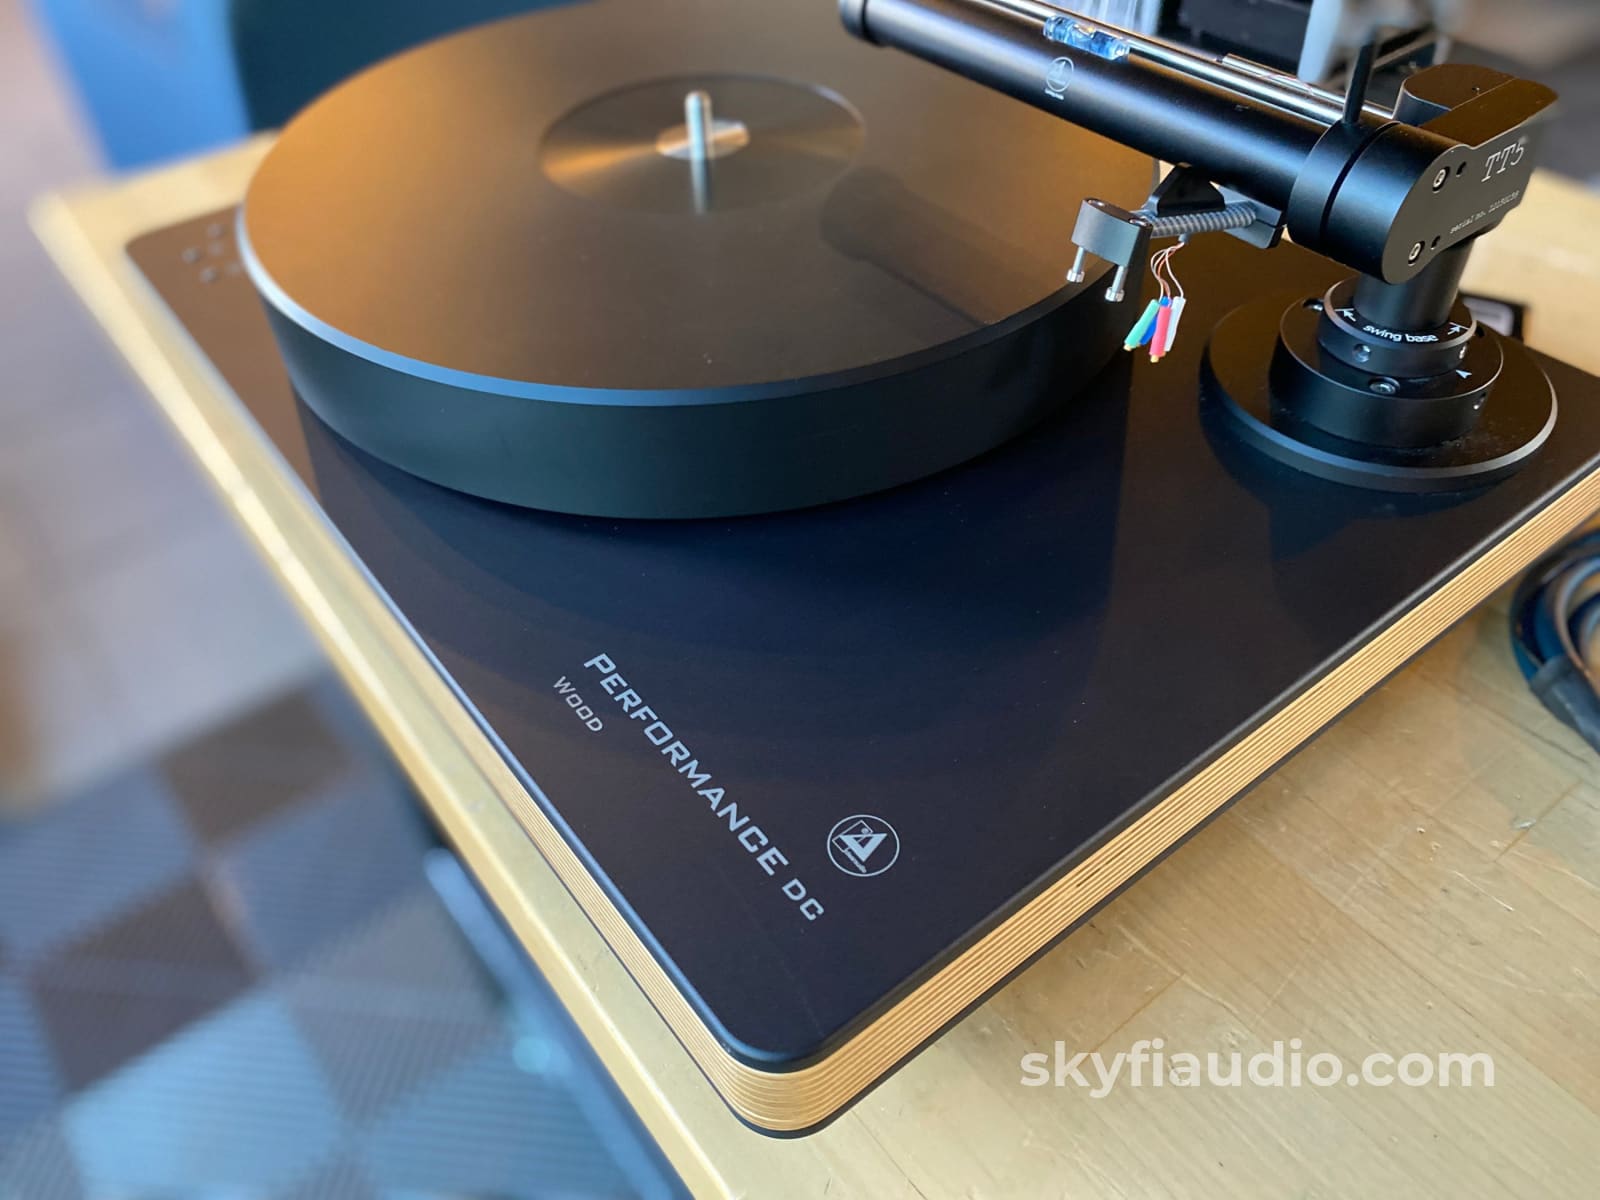 Clearaudio Performance Dc With Tt-5 Linear Tracking Arm Turntable